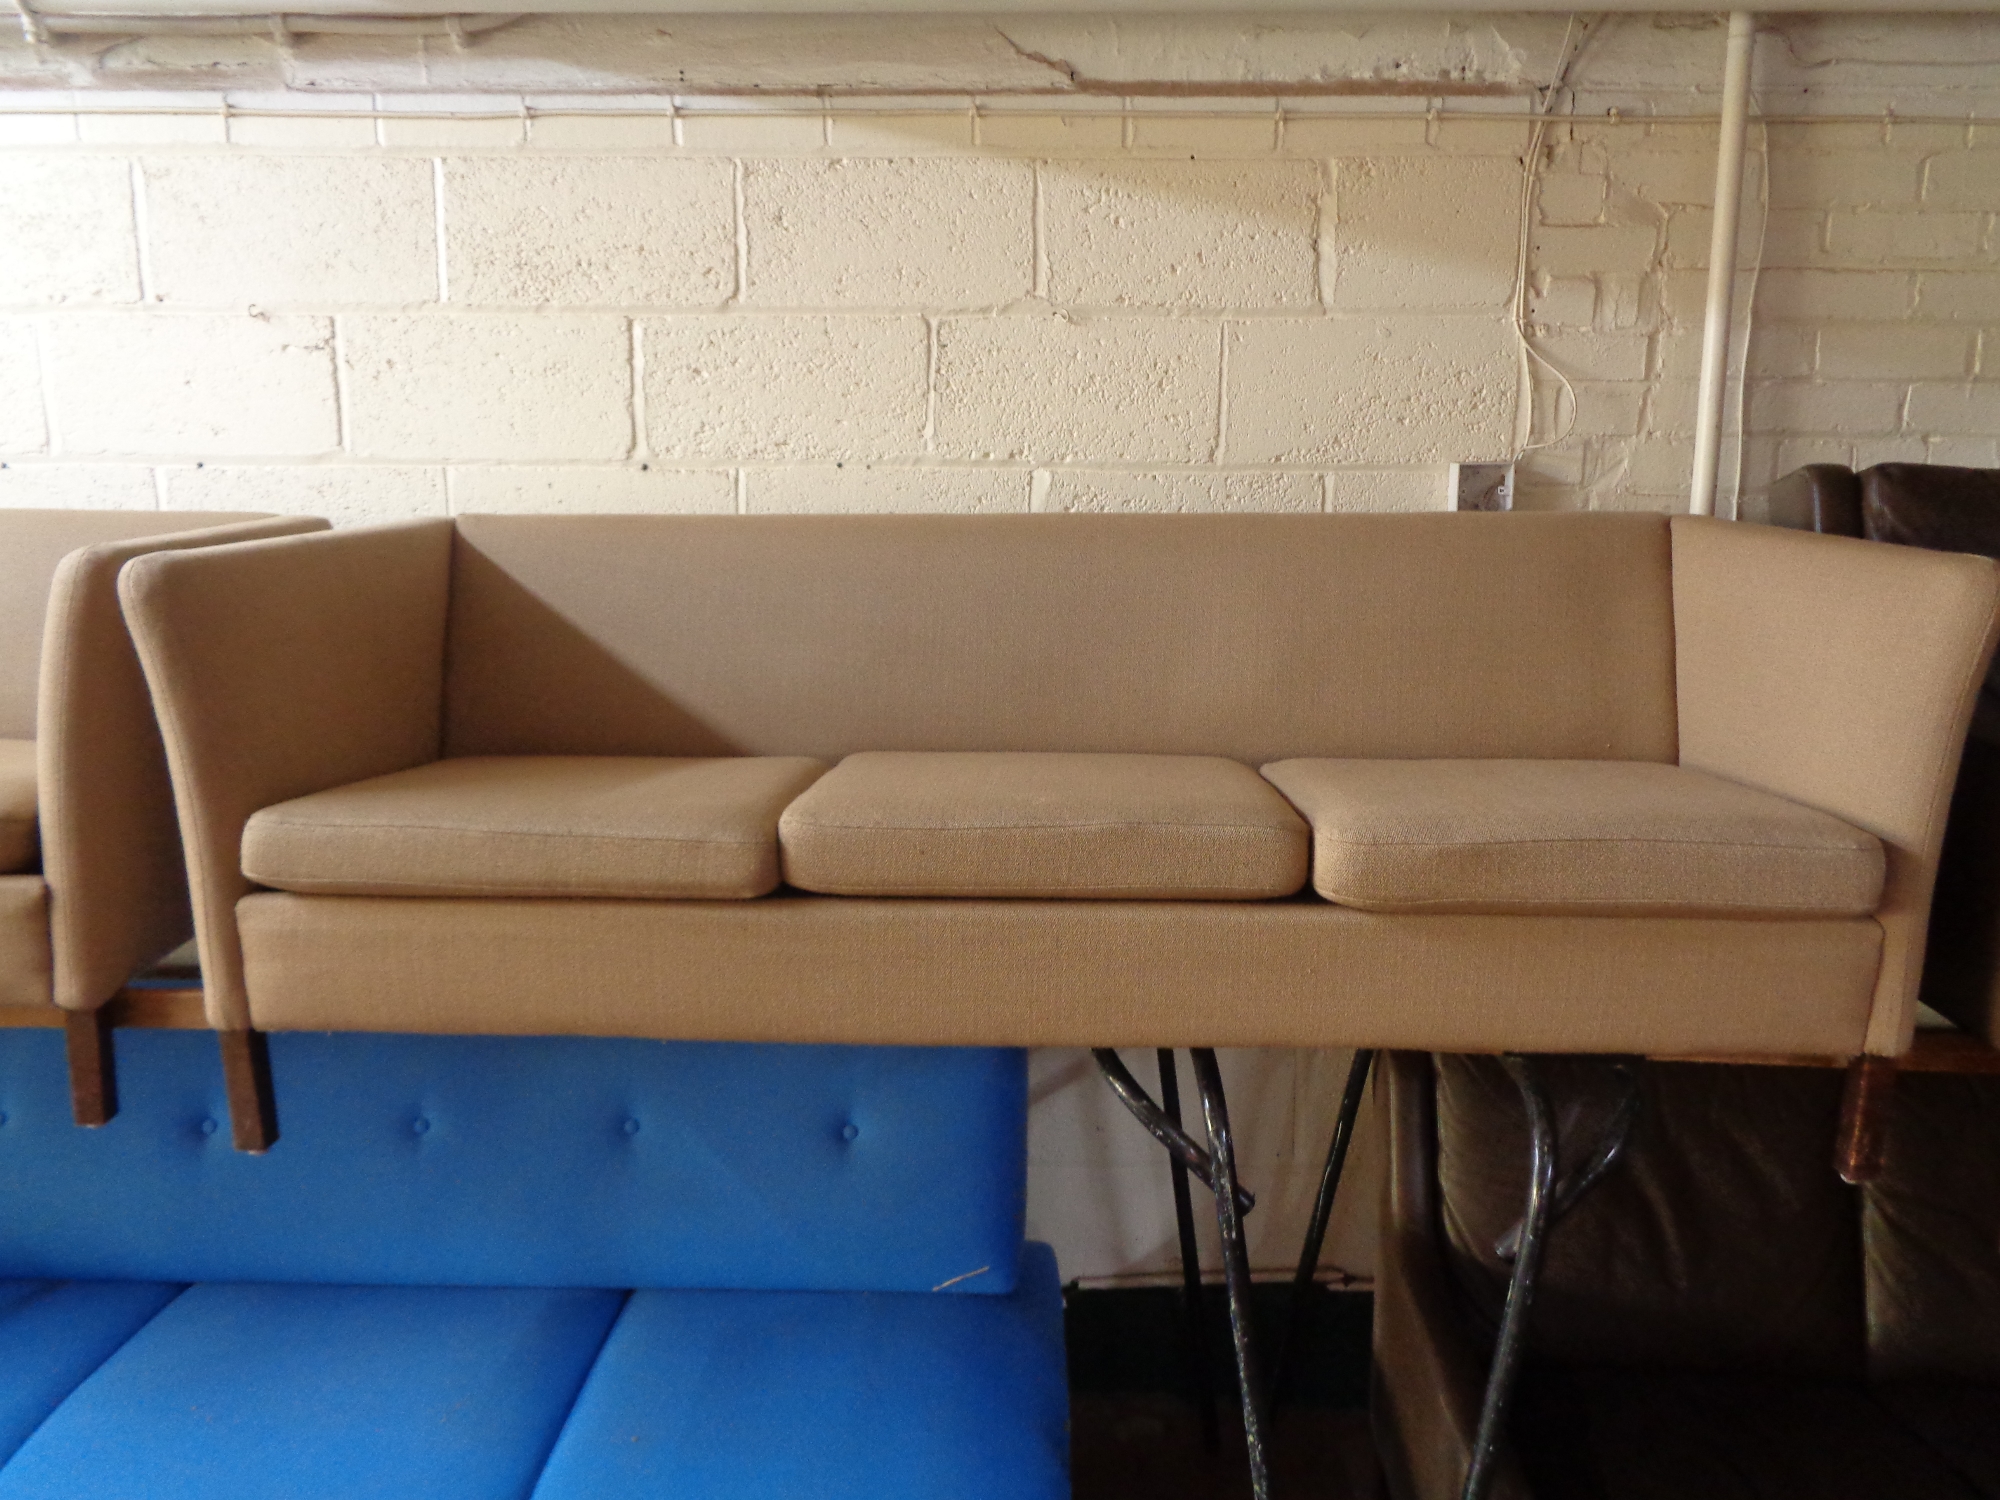 A mid 20th century three seater settee and two seater settee upholstered in beige fabric - Image 2 of 3